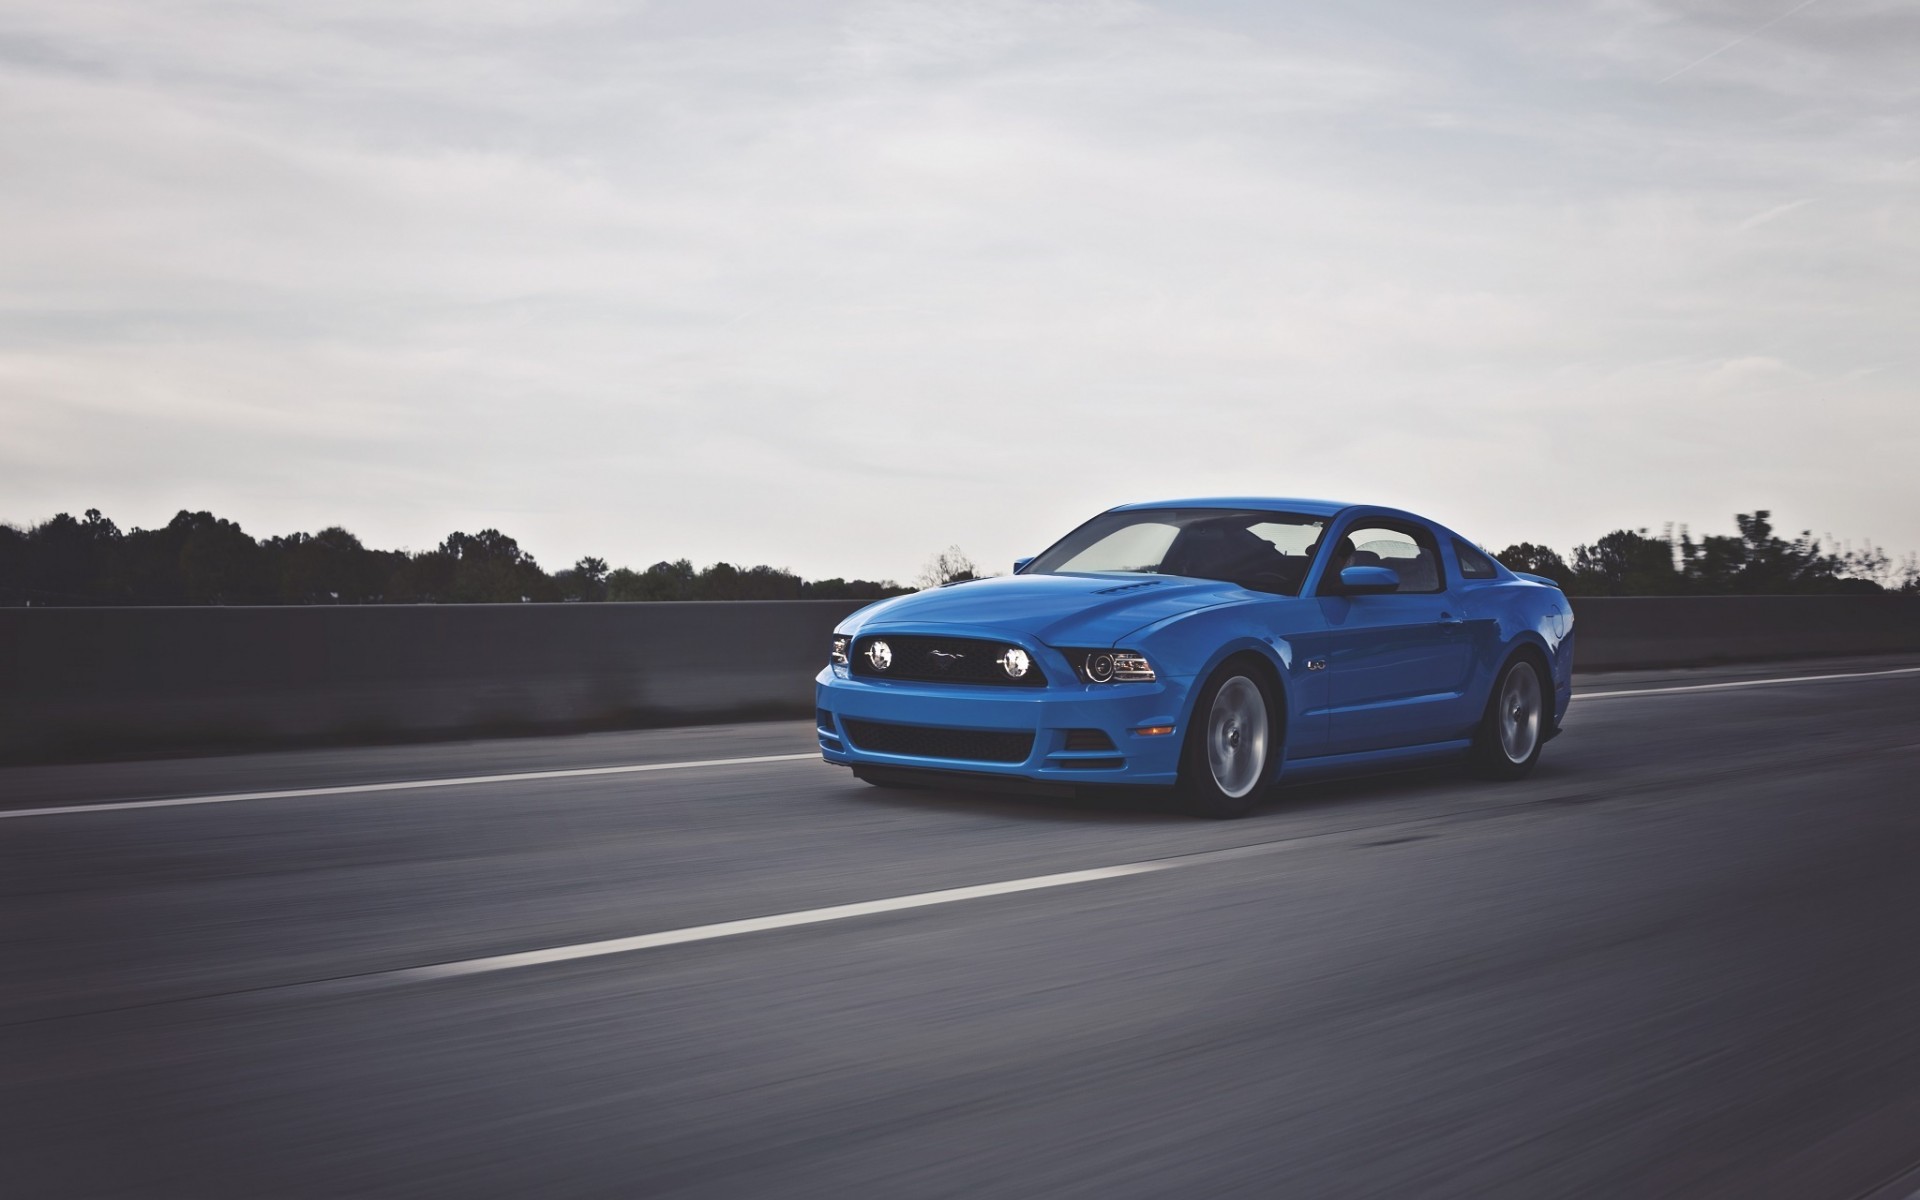 General 1920x1200 muscle cars Ford Mustang blue cars road Ford asphalt vehicle Ford Mustang S-197 II car American cars